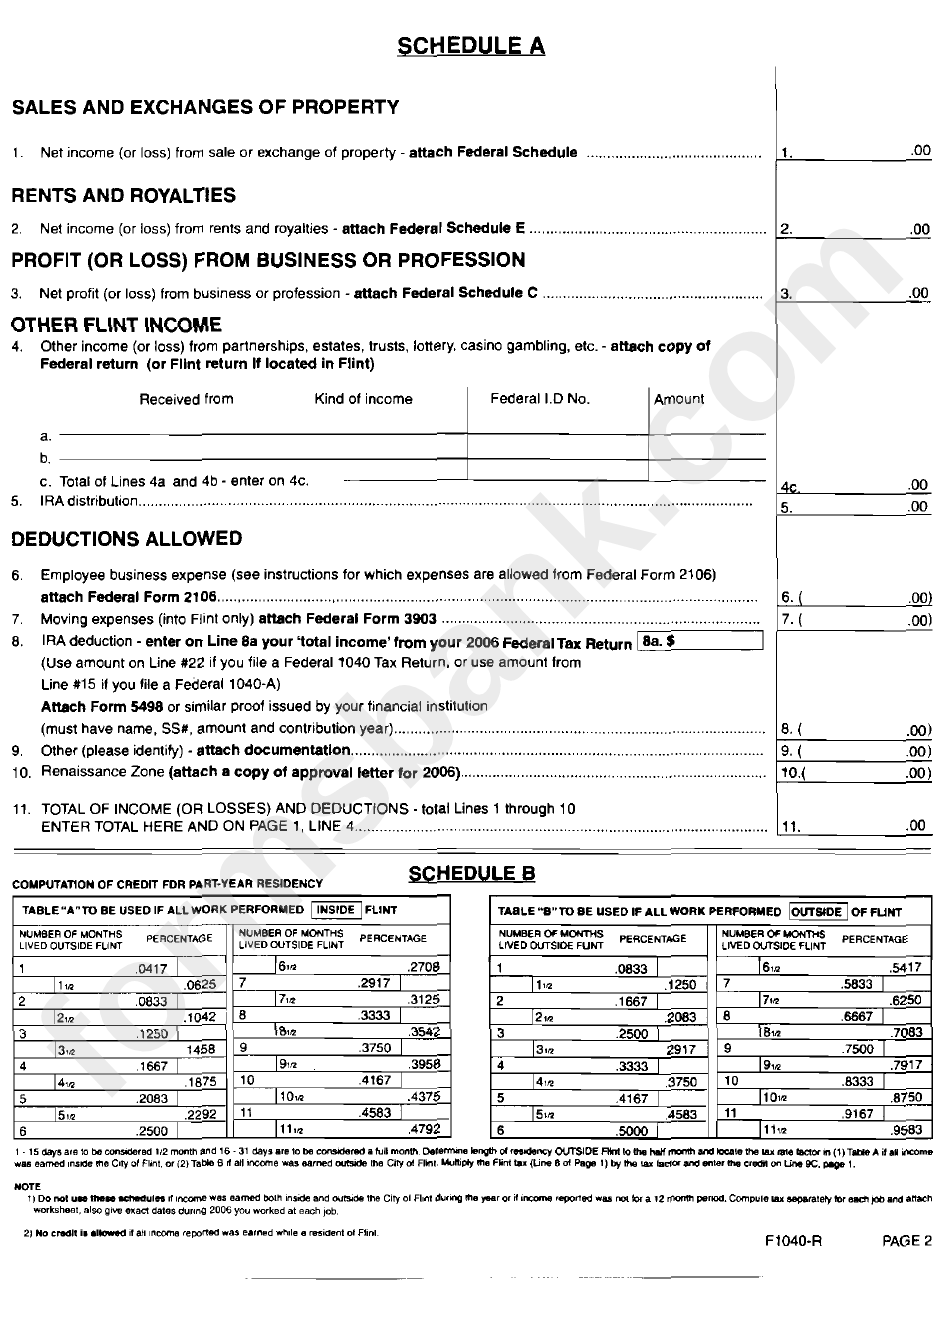 Form F-1040-R - City Of Flint Resident Individual Income Tax Return - 2006